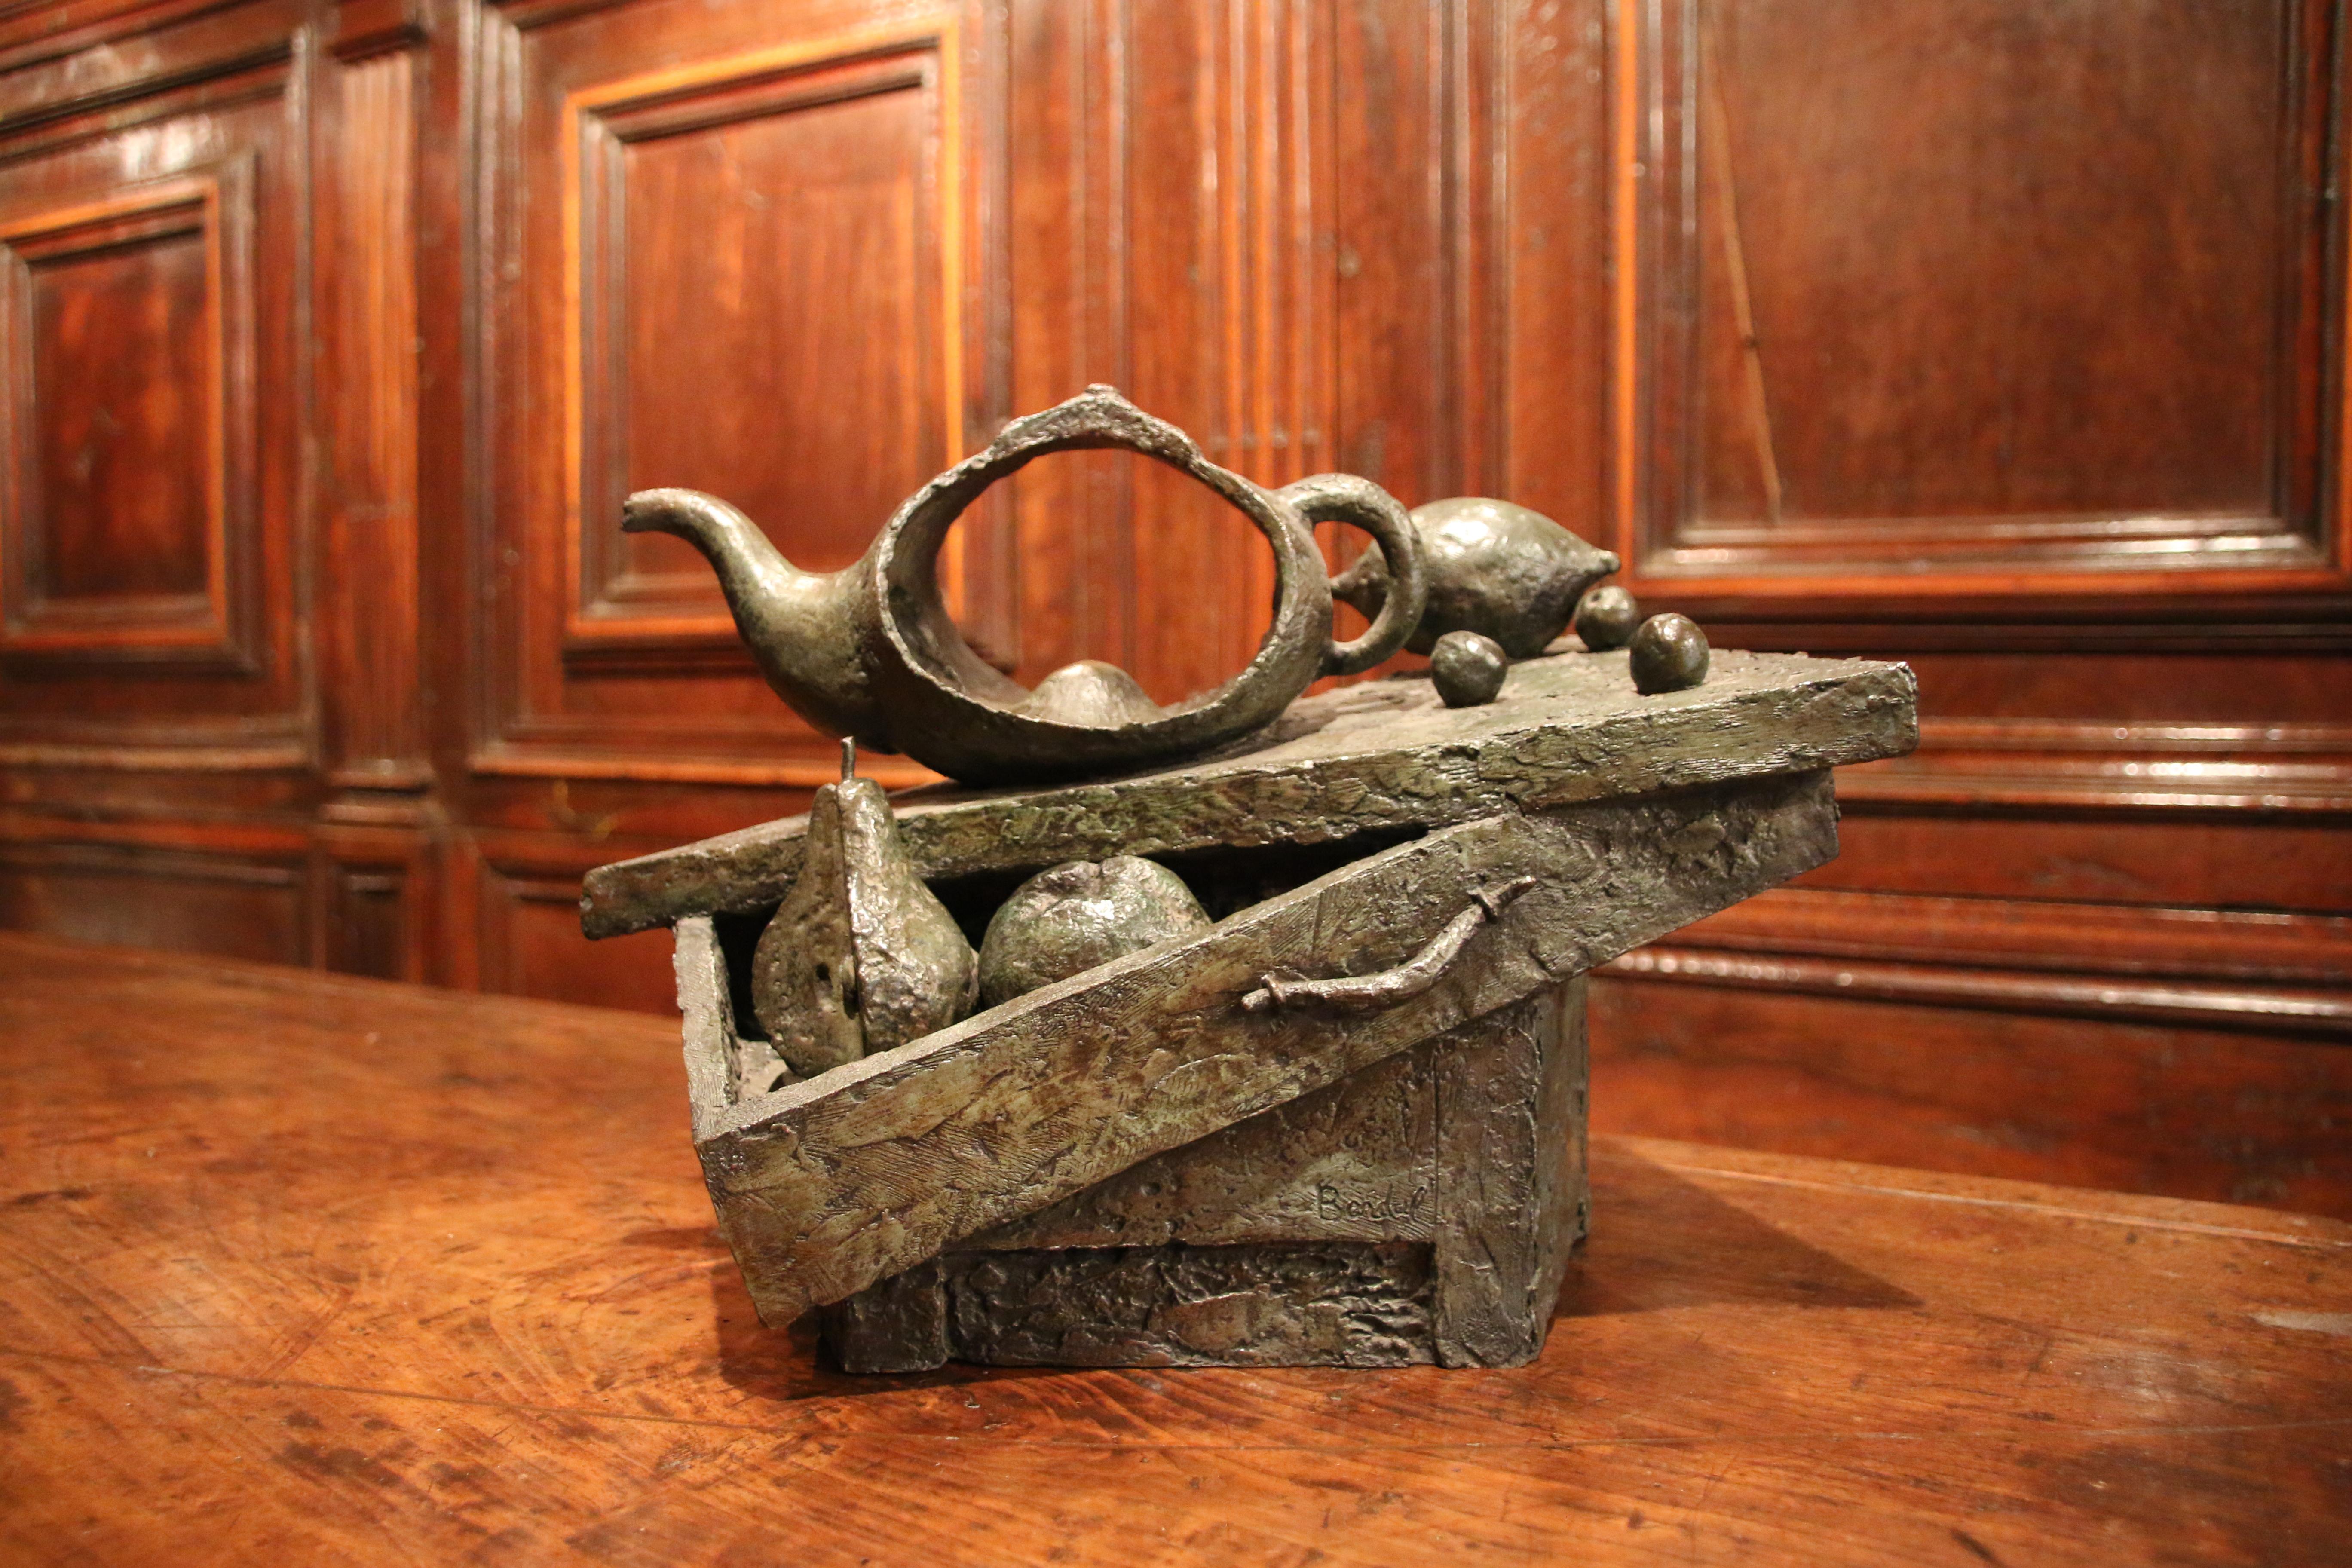 ALEX BERDAL (Perpignan, 1945)
Nature Morte or Ouverture, 1980

Bronze with green patination

Signed at the front. 
Numbered 6/8 on the reverse
Foundry mark « Fonderie de la Plaine »

Measures: Height : 26 cm
Width : 36 cm
Depth : 12